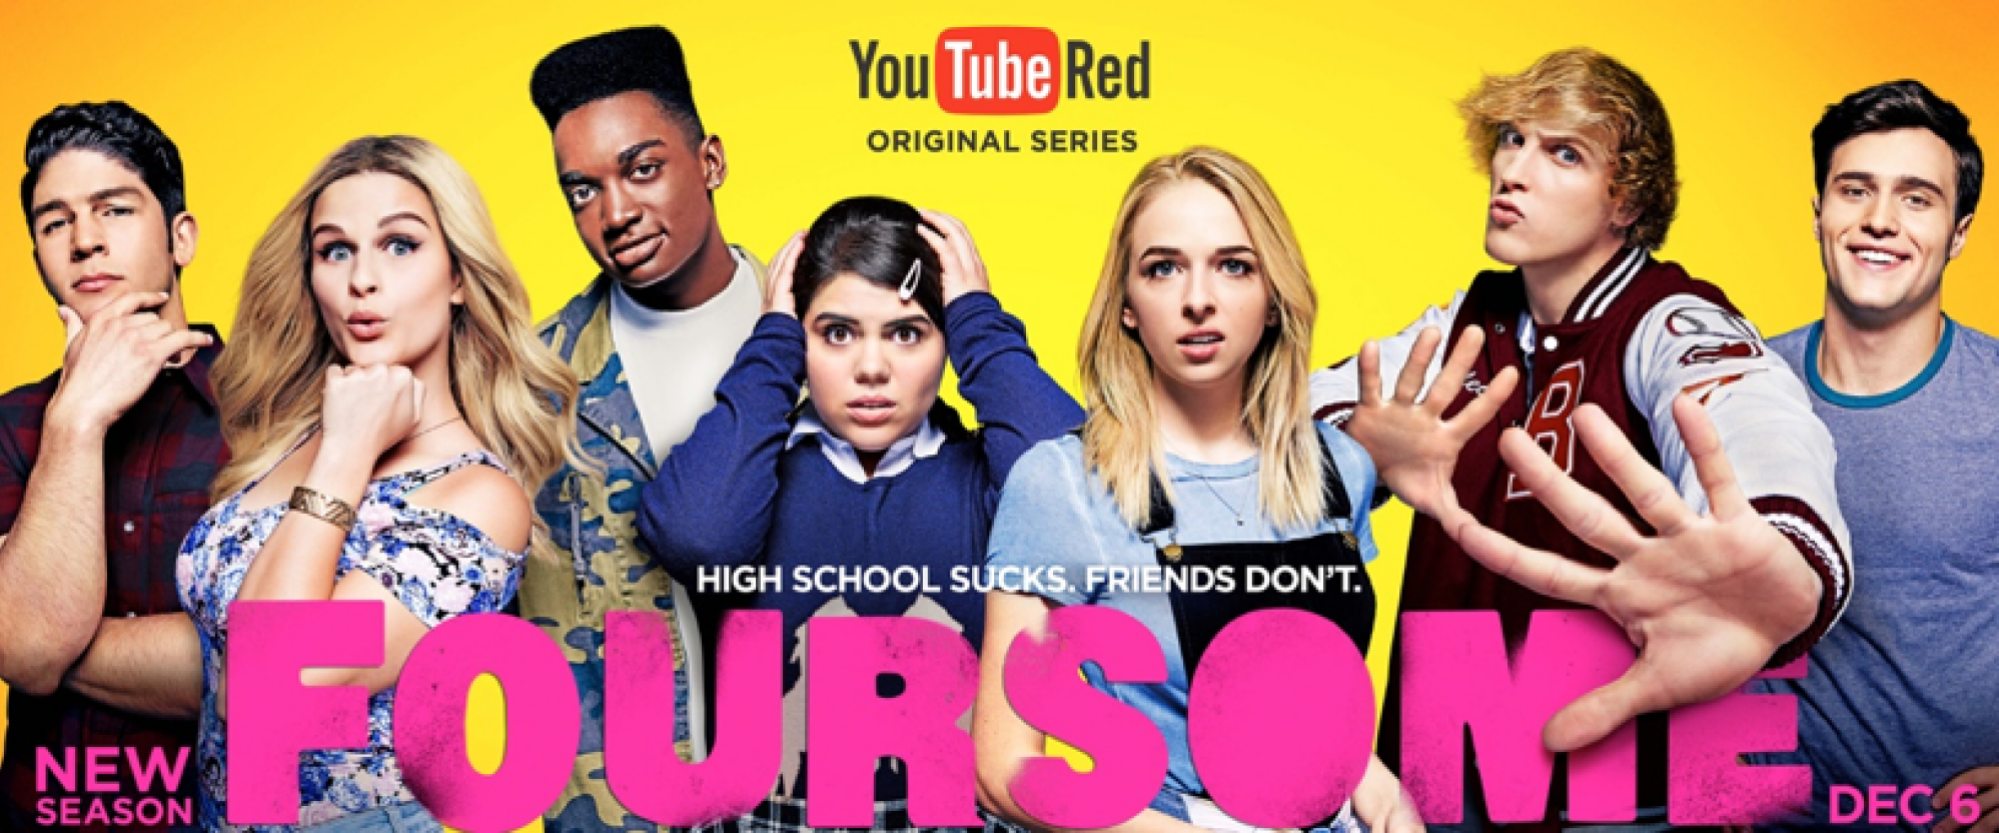 amy rosales recommends foursome awesomenesstv free streaming pic